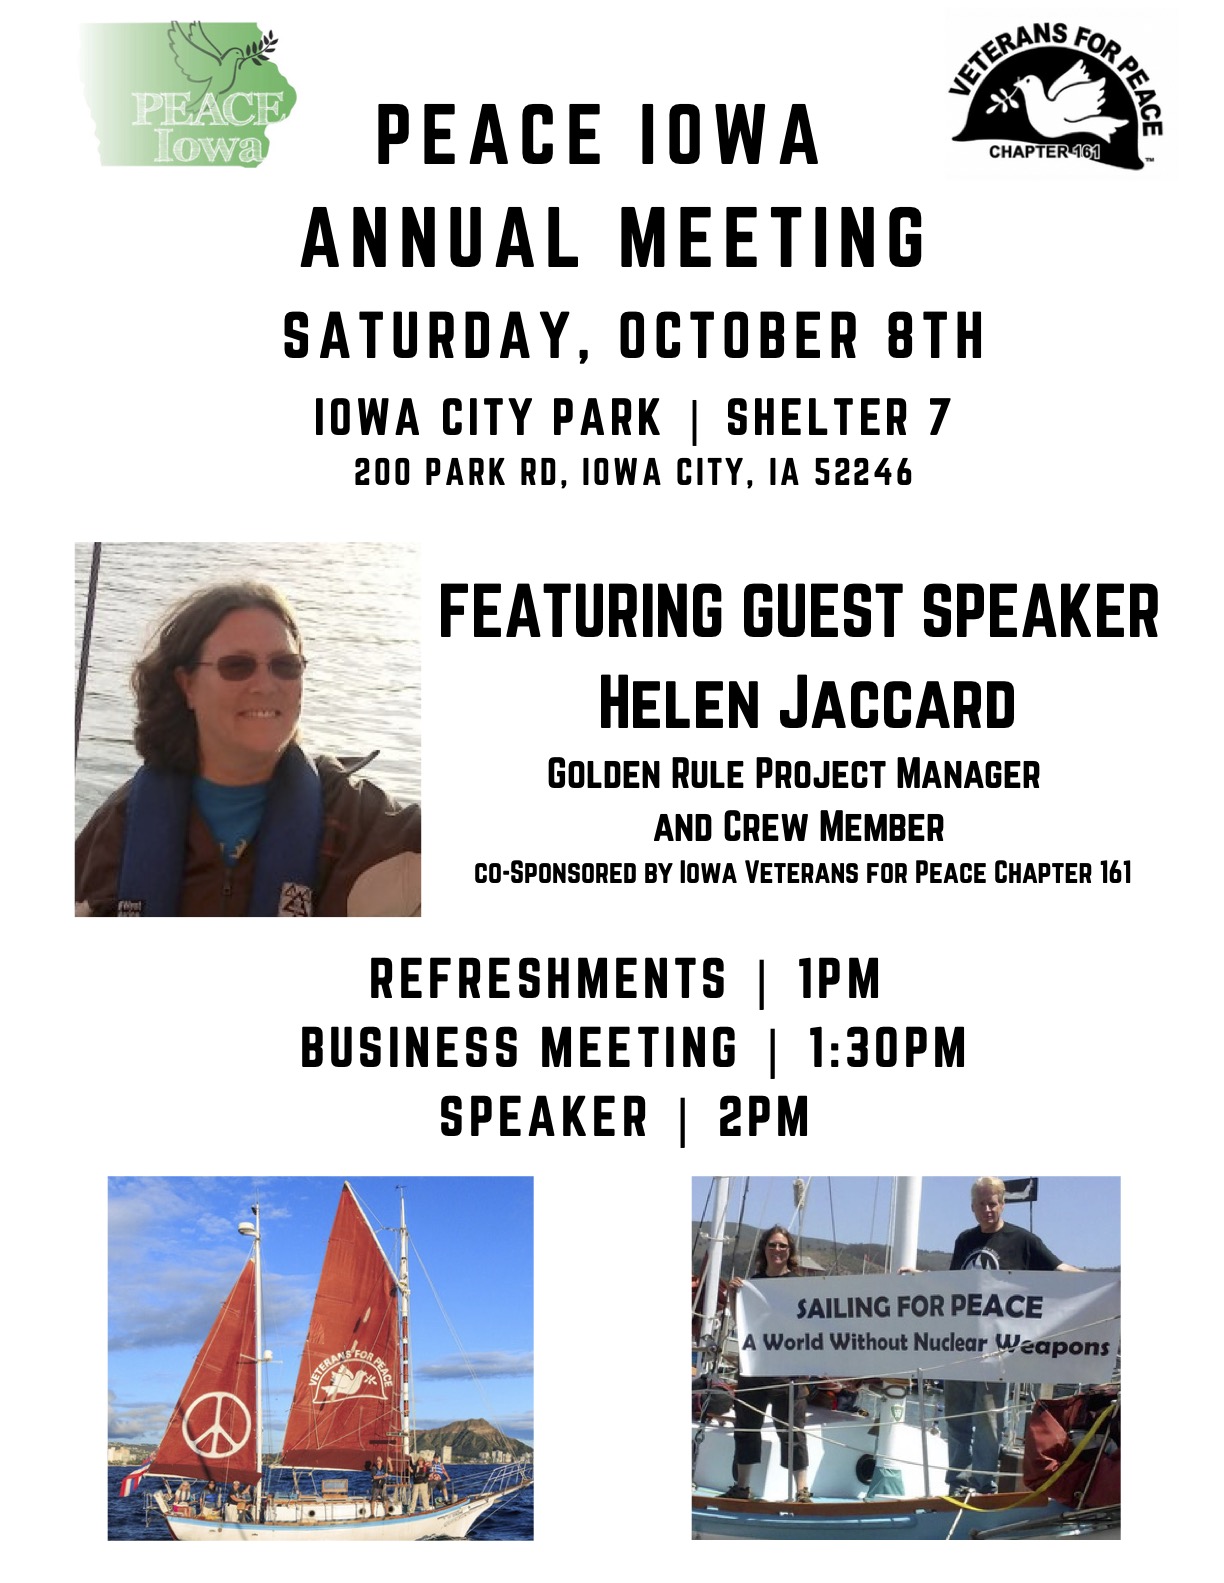 PEACE Iowa annual meeting, Saturday, October 8th, Iowa City Park Shelter 7. Featuring guest speaker Helen Jaccard, Golden Rule Project Manager and Crew Member. Click for more information (accessible PDF).